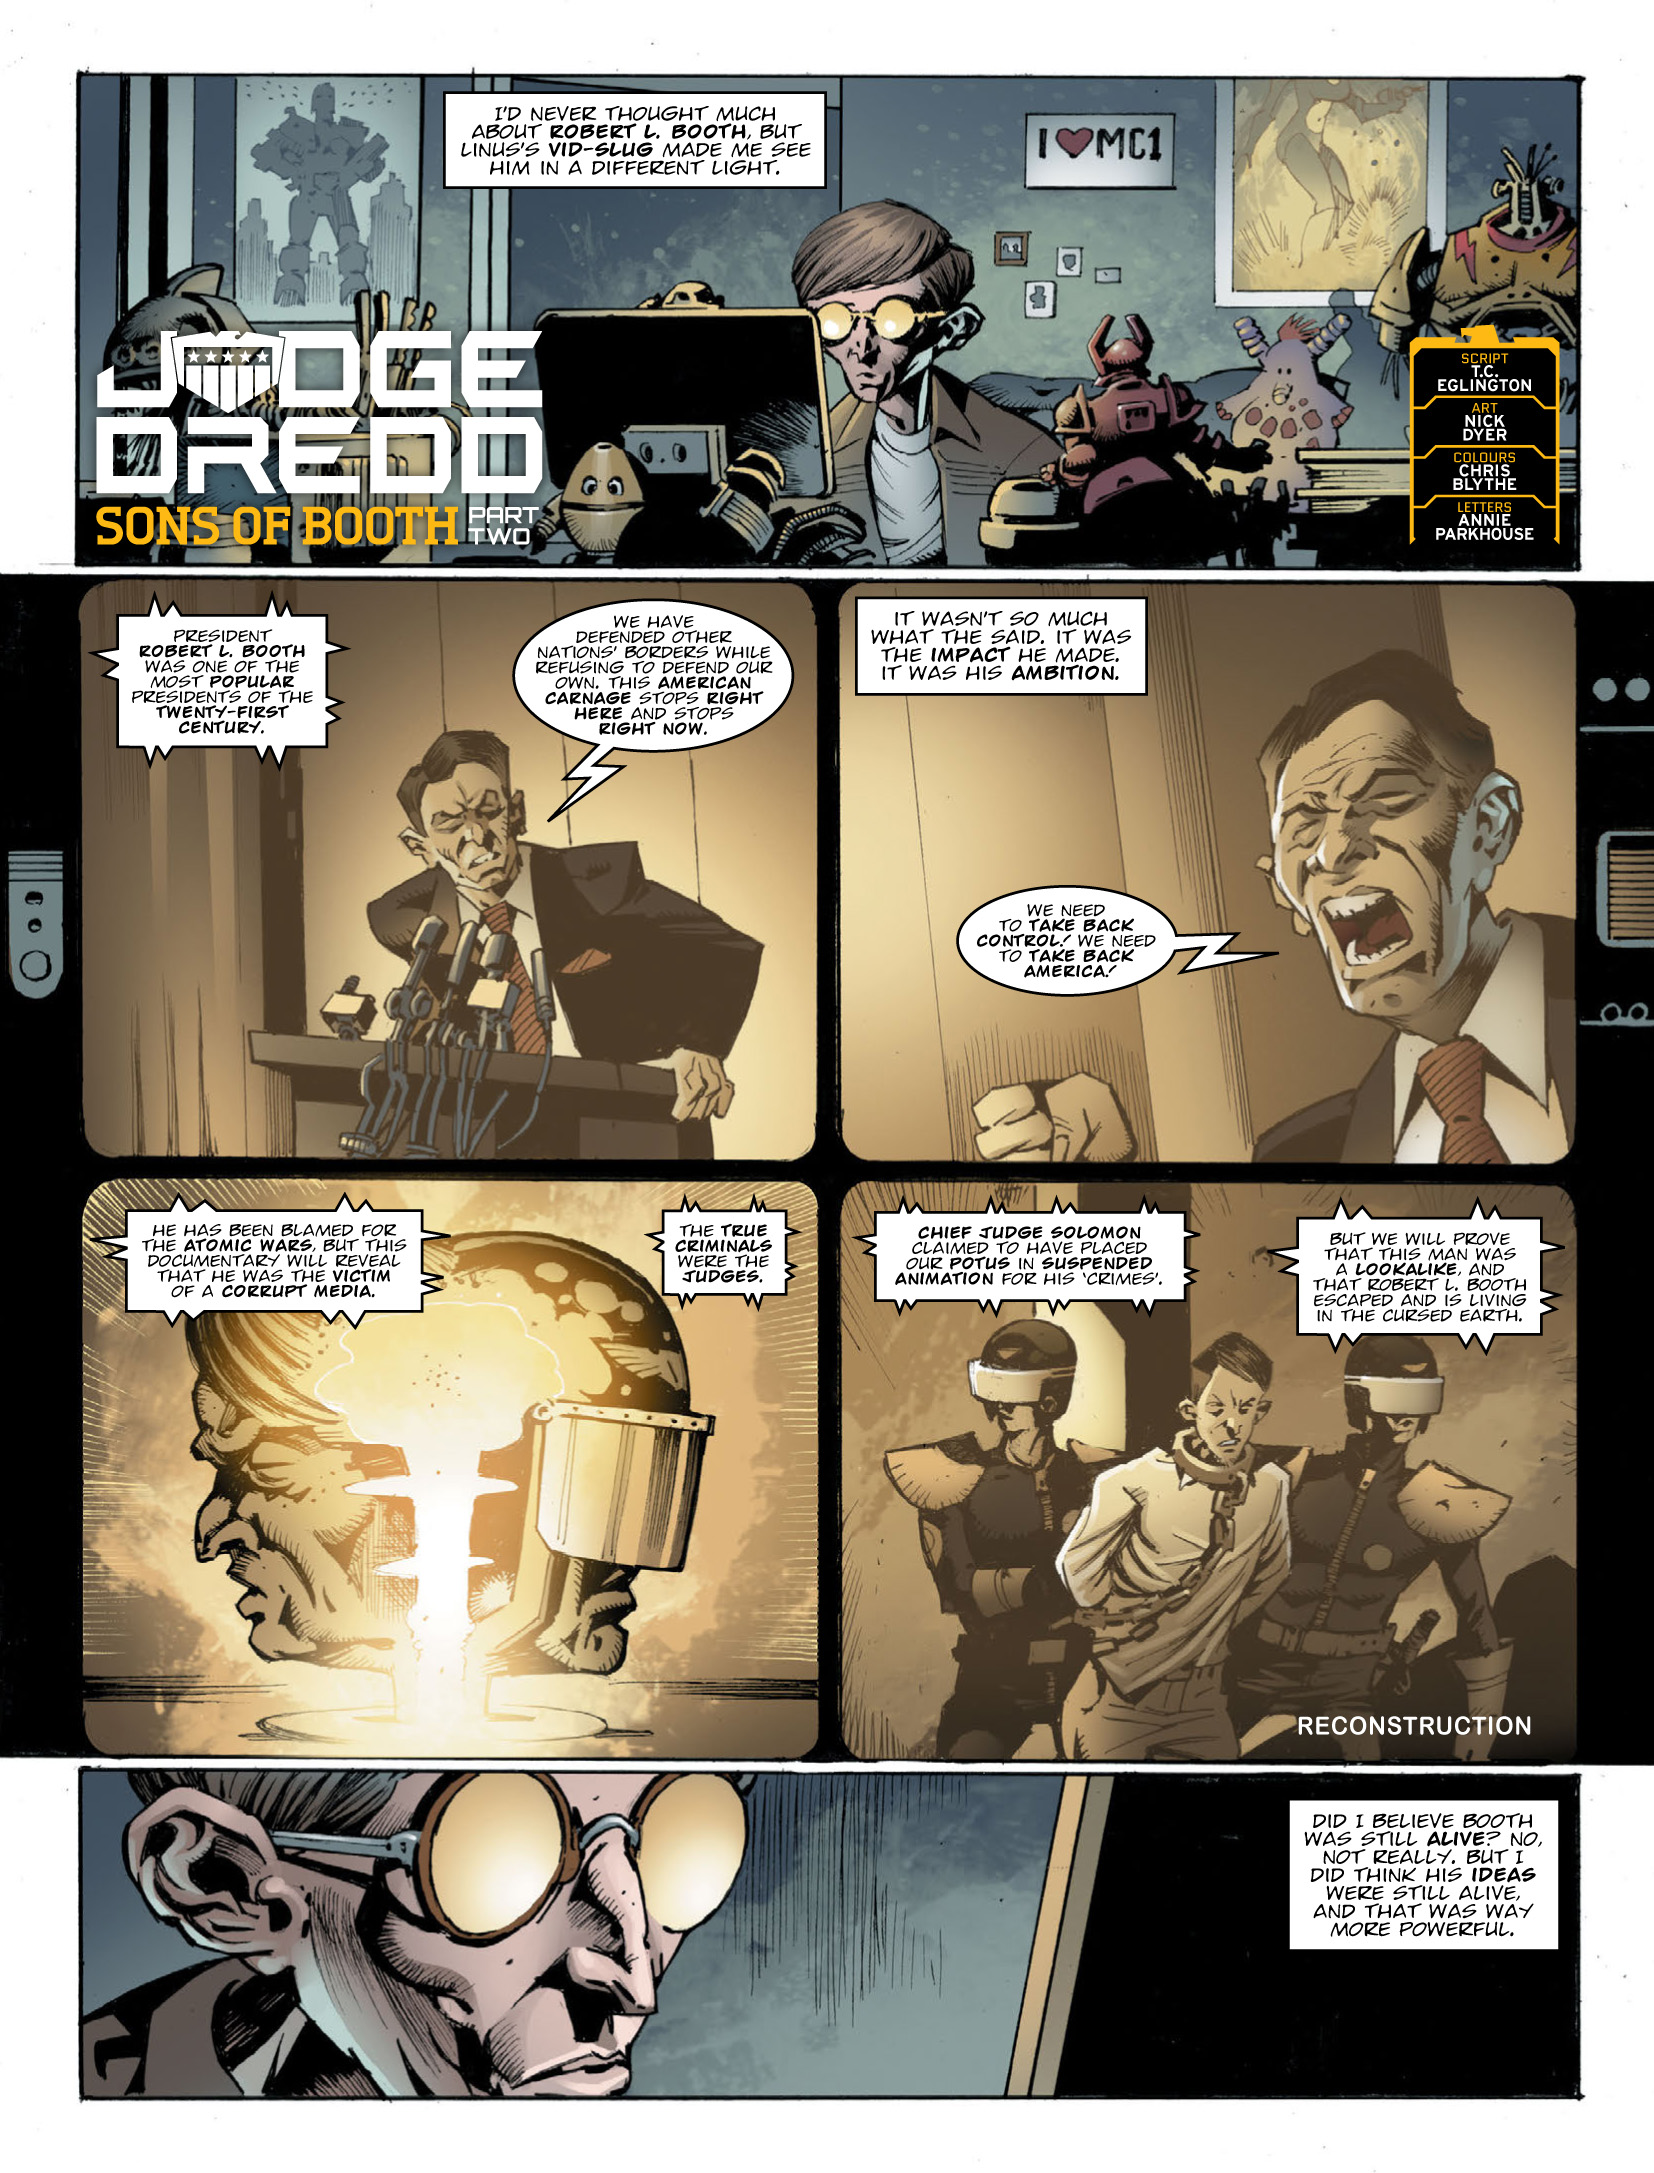 2000 AD: Chapter 2031 - Page 3